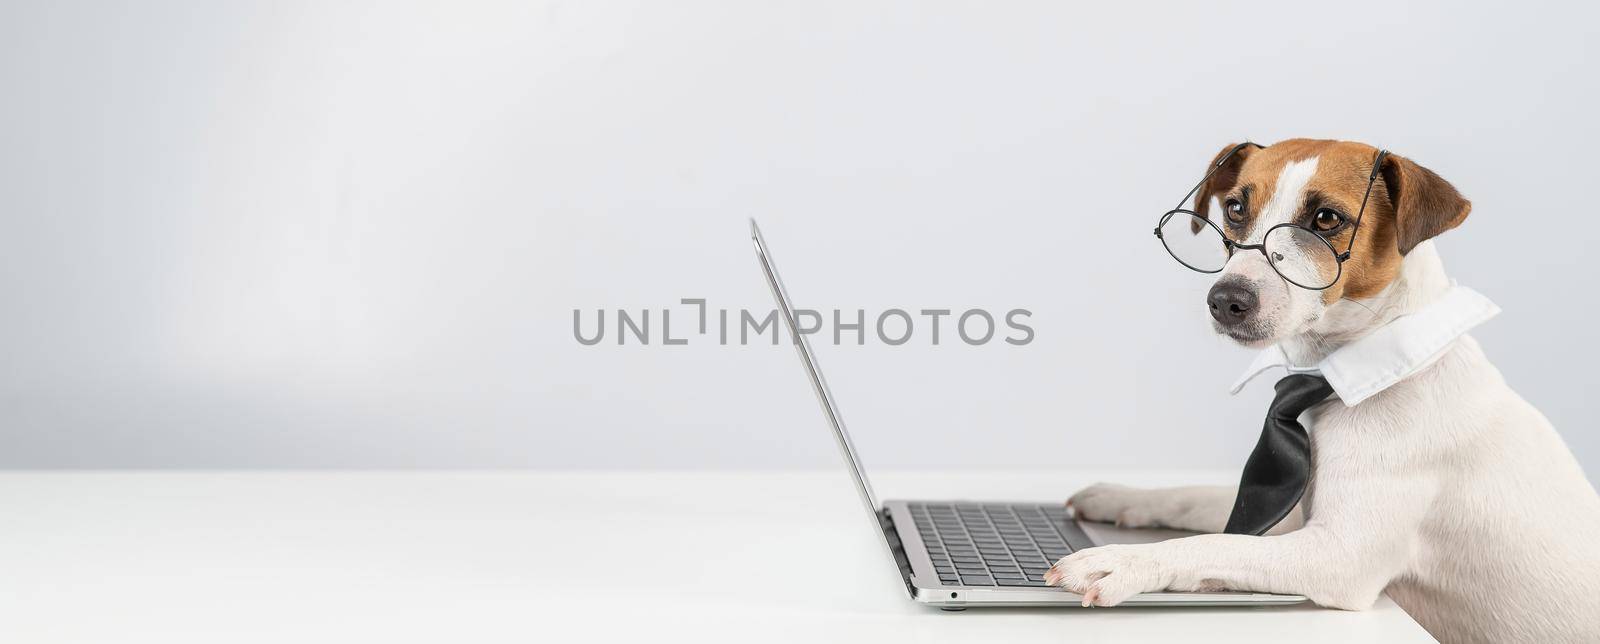 Jack russell terrier dog in glasses and tie works on laptop on white background. by mrwed54